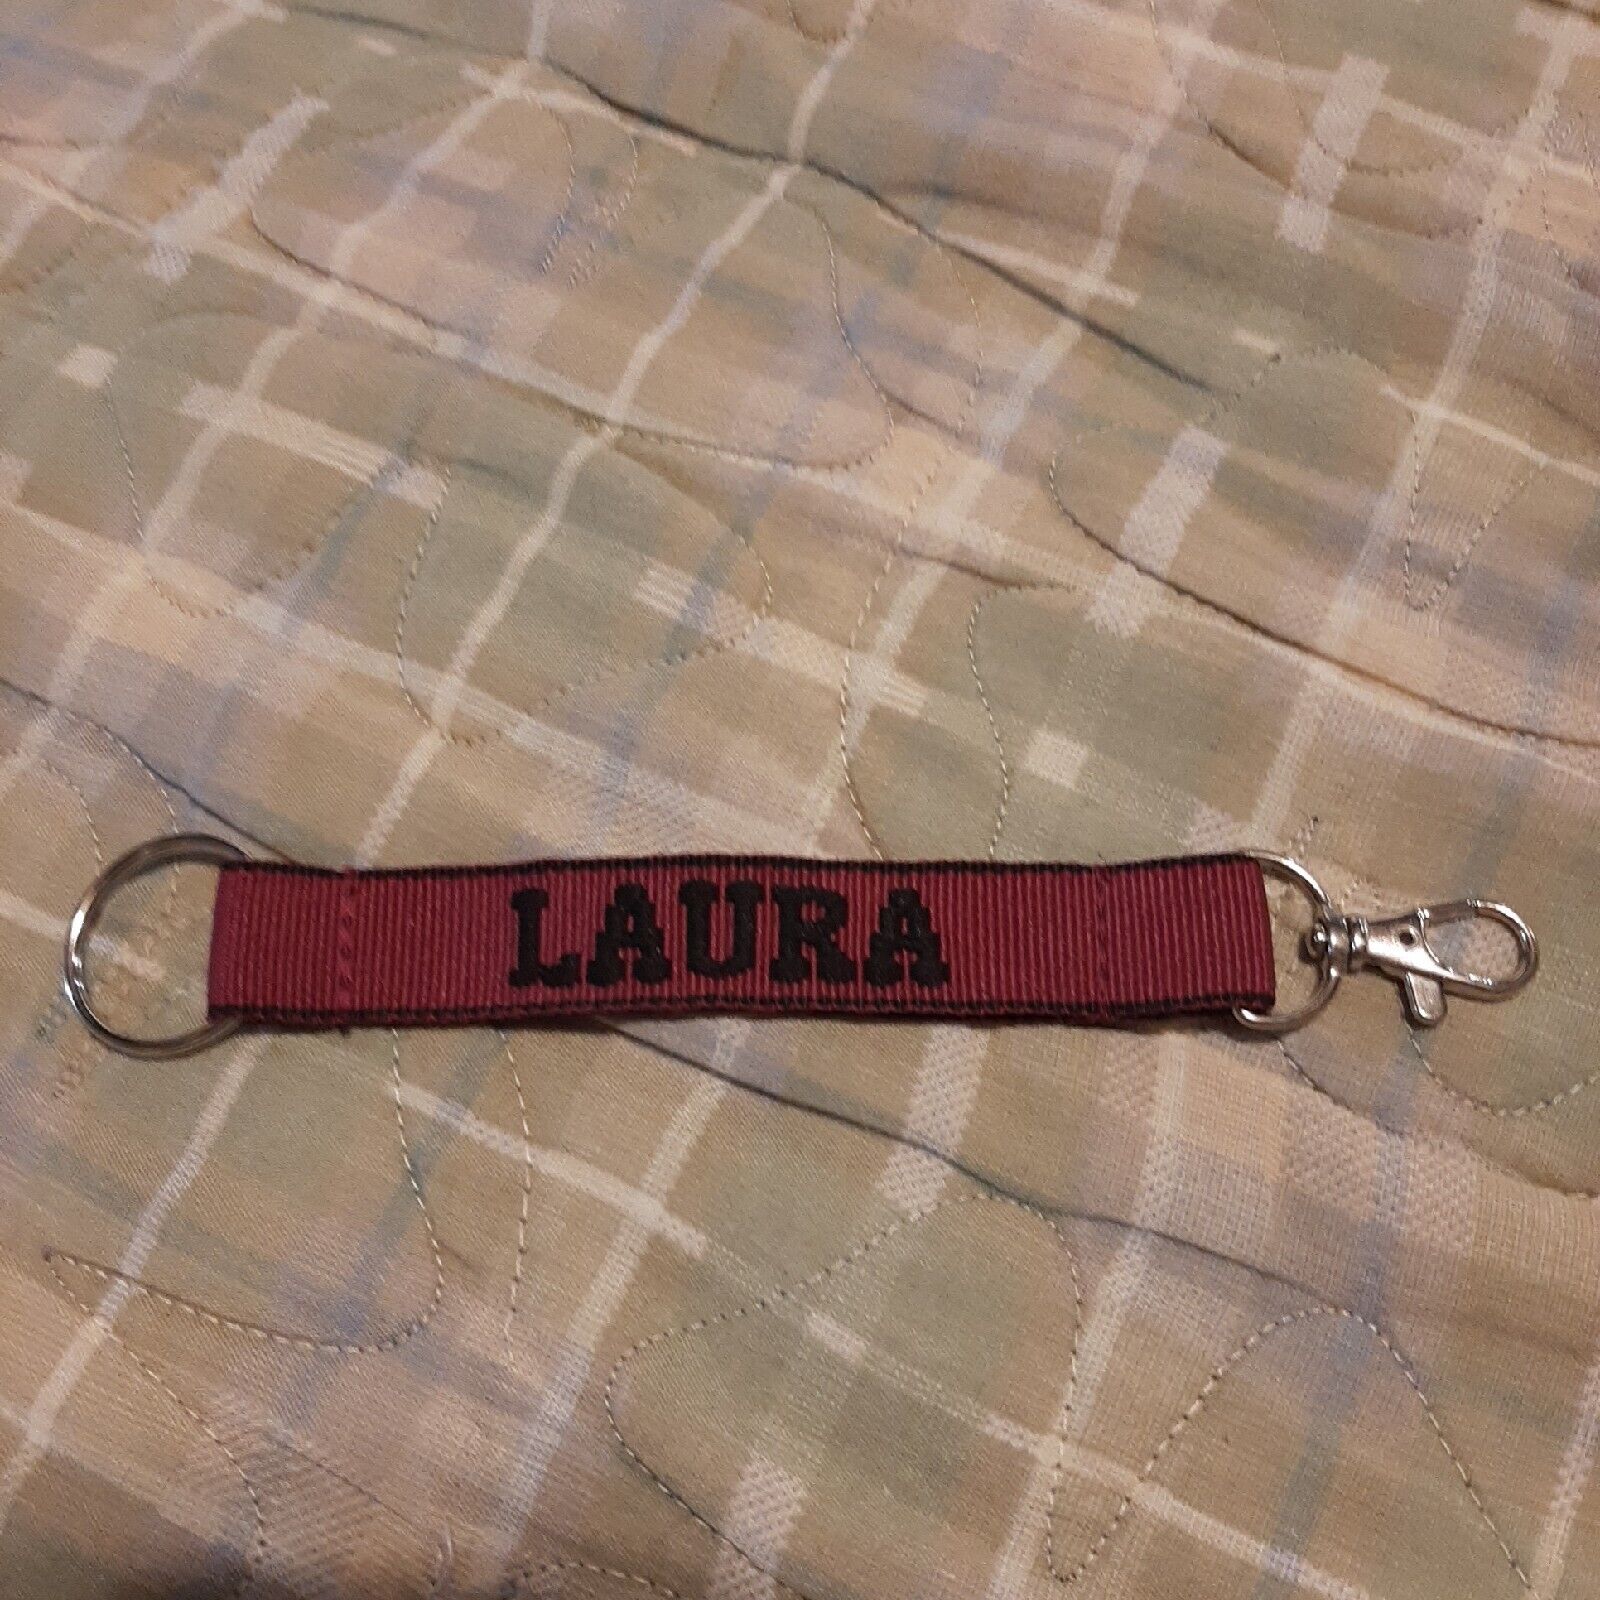 LAURA Embroidered Name Strap Key Ring, Keychain with Clasp (MAROON & BLACK)